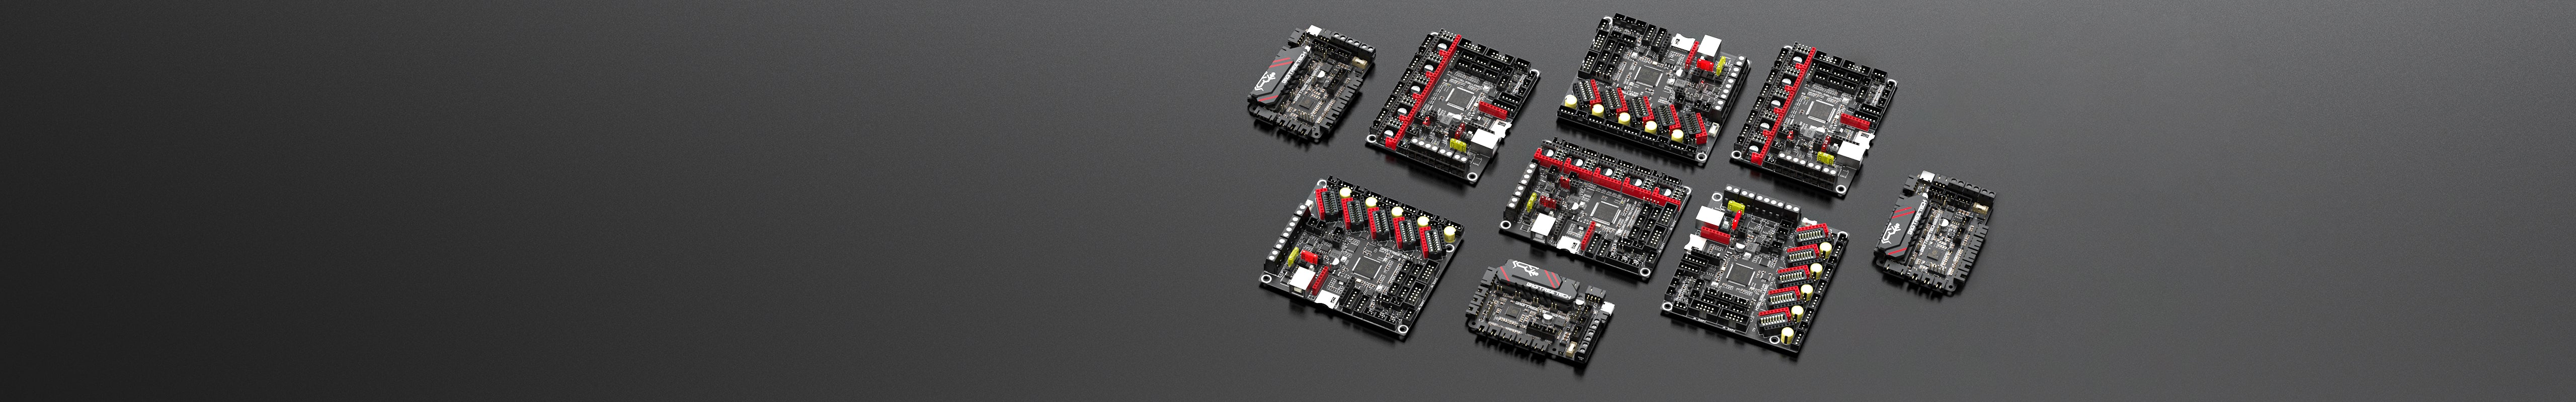 3d printer control board collection for various 3d printer models